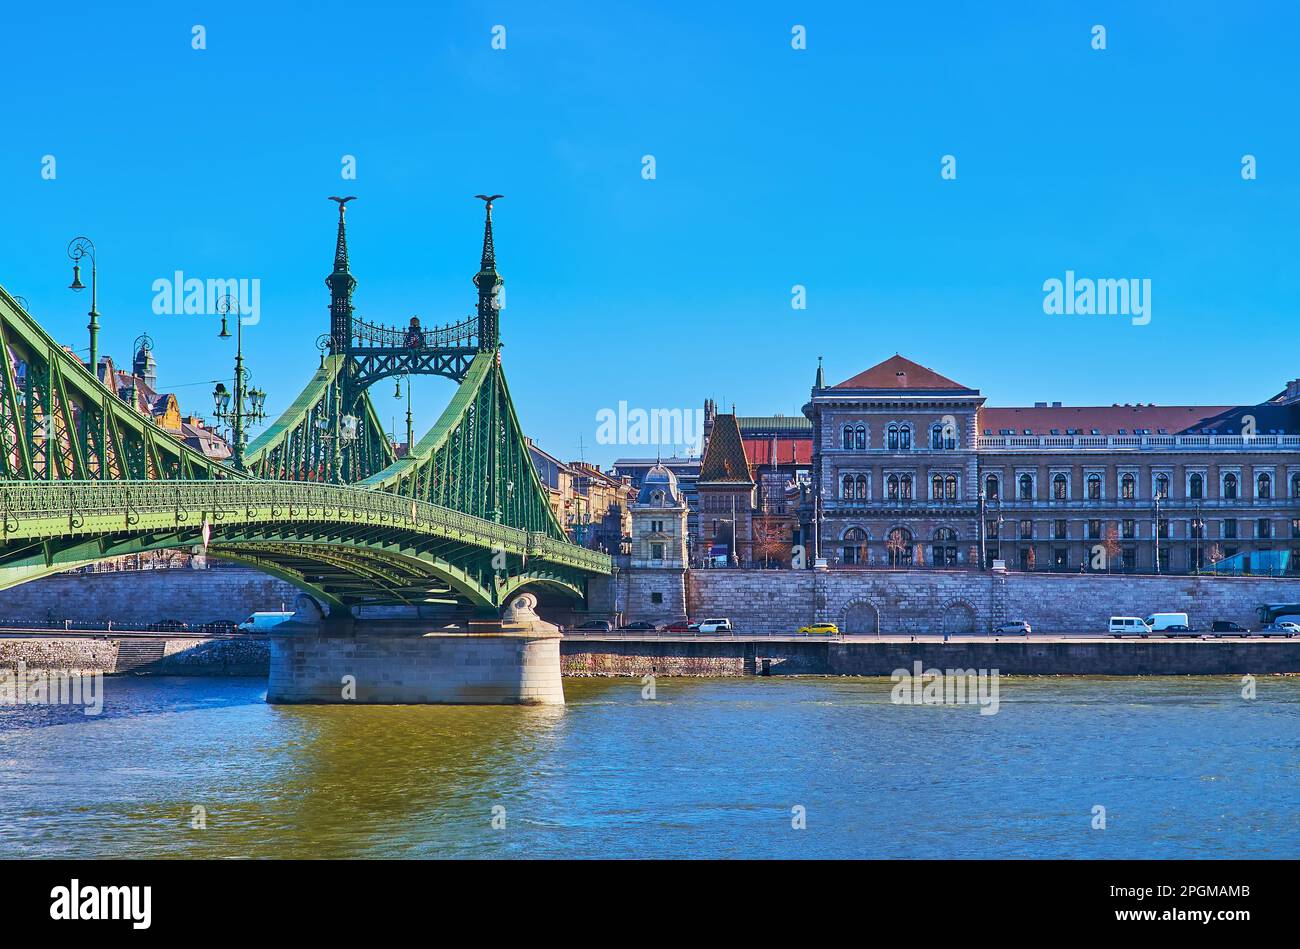 Historic green Art Nouveau Liberty Bridge across Danube River with a view on the Corvin University on the opposite bank, Budapest, Hungary Stock Photo